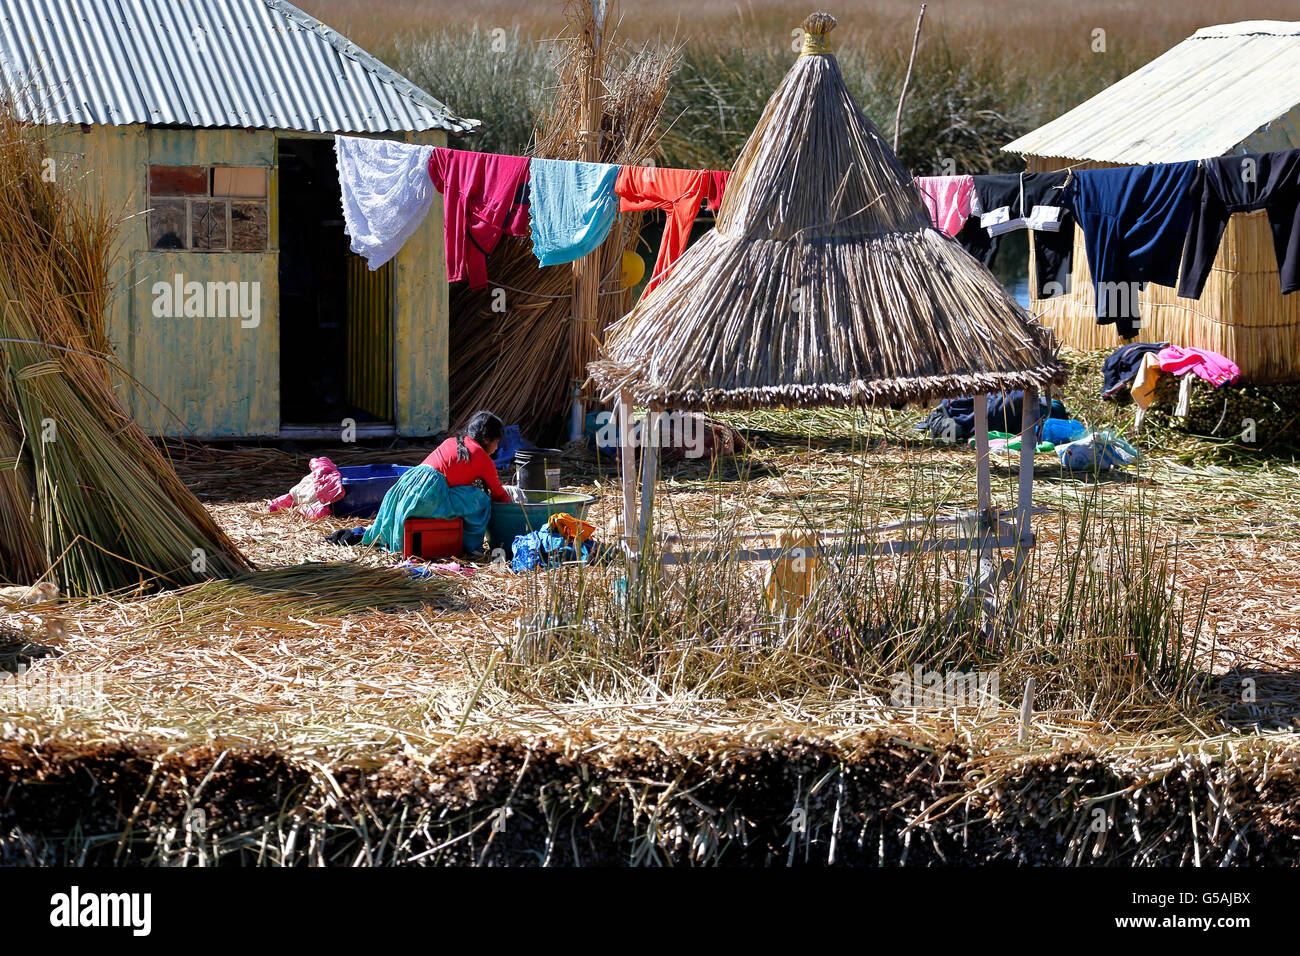 Uros woman, drying laundry and houses on totora reed island, Uros Islands, Lake Titicaca, Puno, Peru Stock Photo